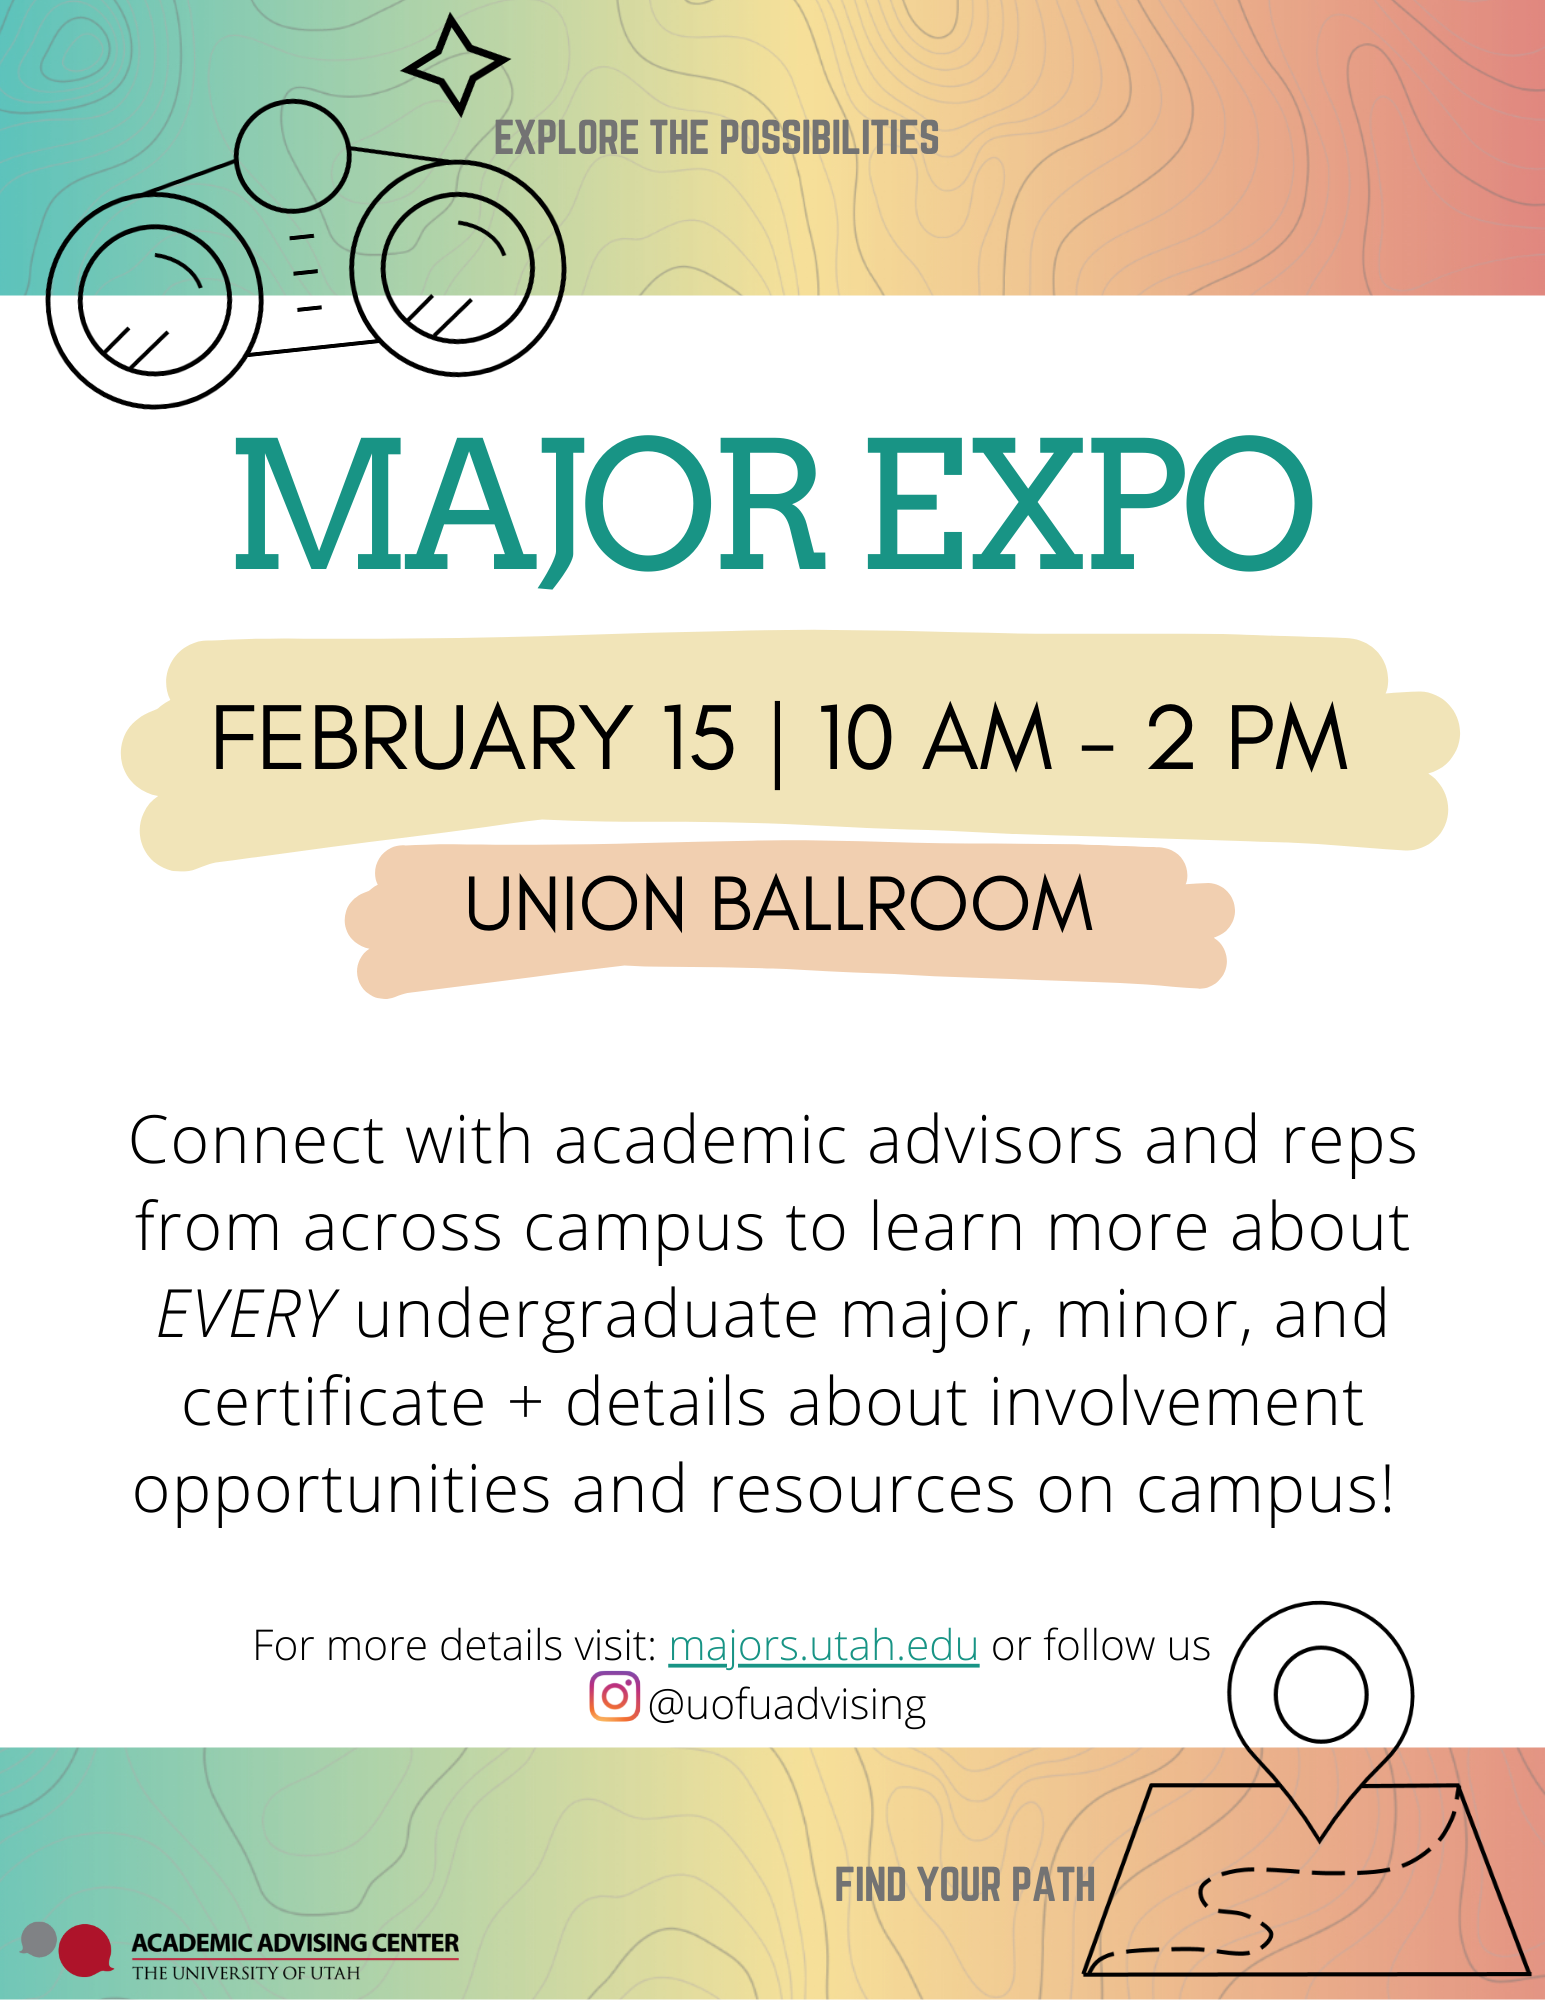 green to orange color gradation. Major Expo is February 15 from 10am to 2pm in the Union Ballroom. Information on every major, minor and certificate on campus!